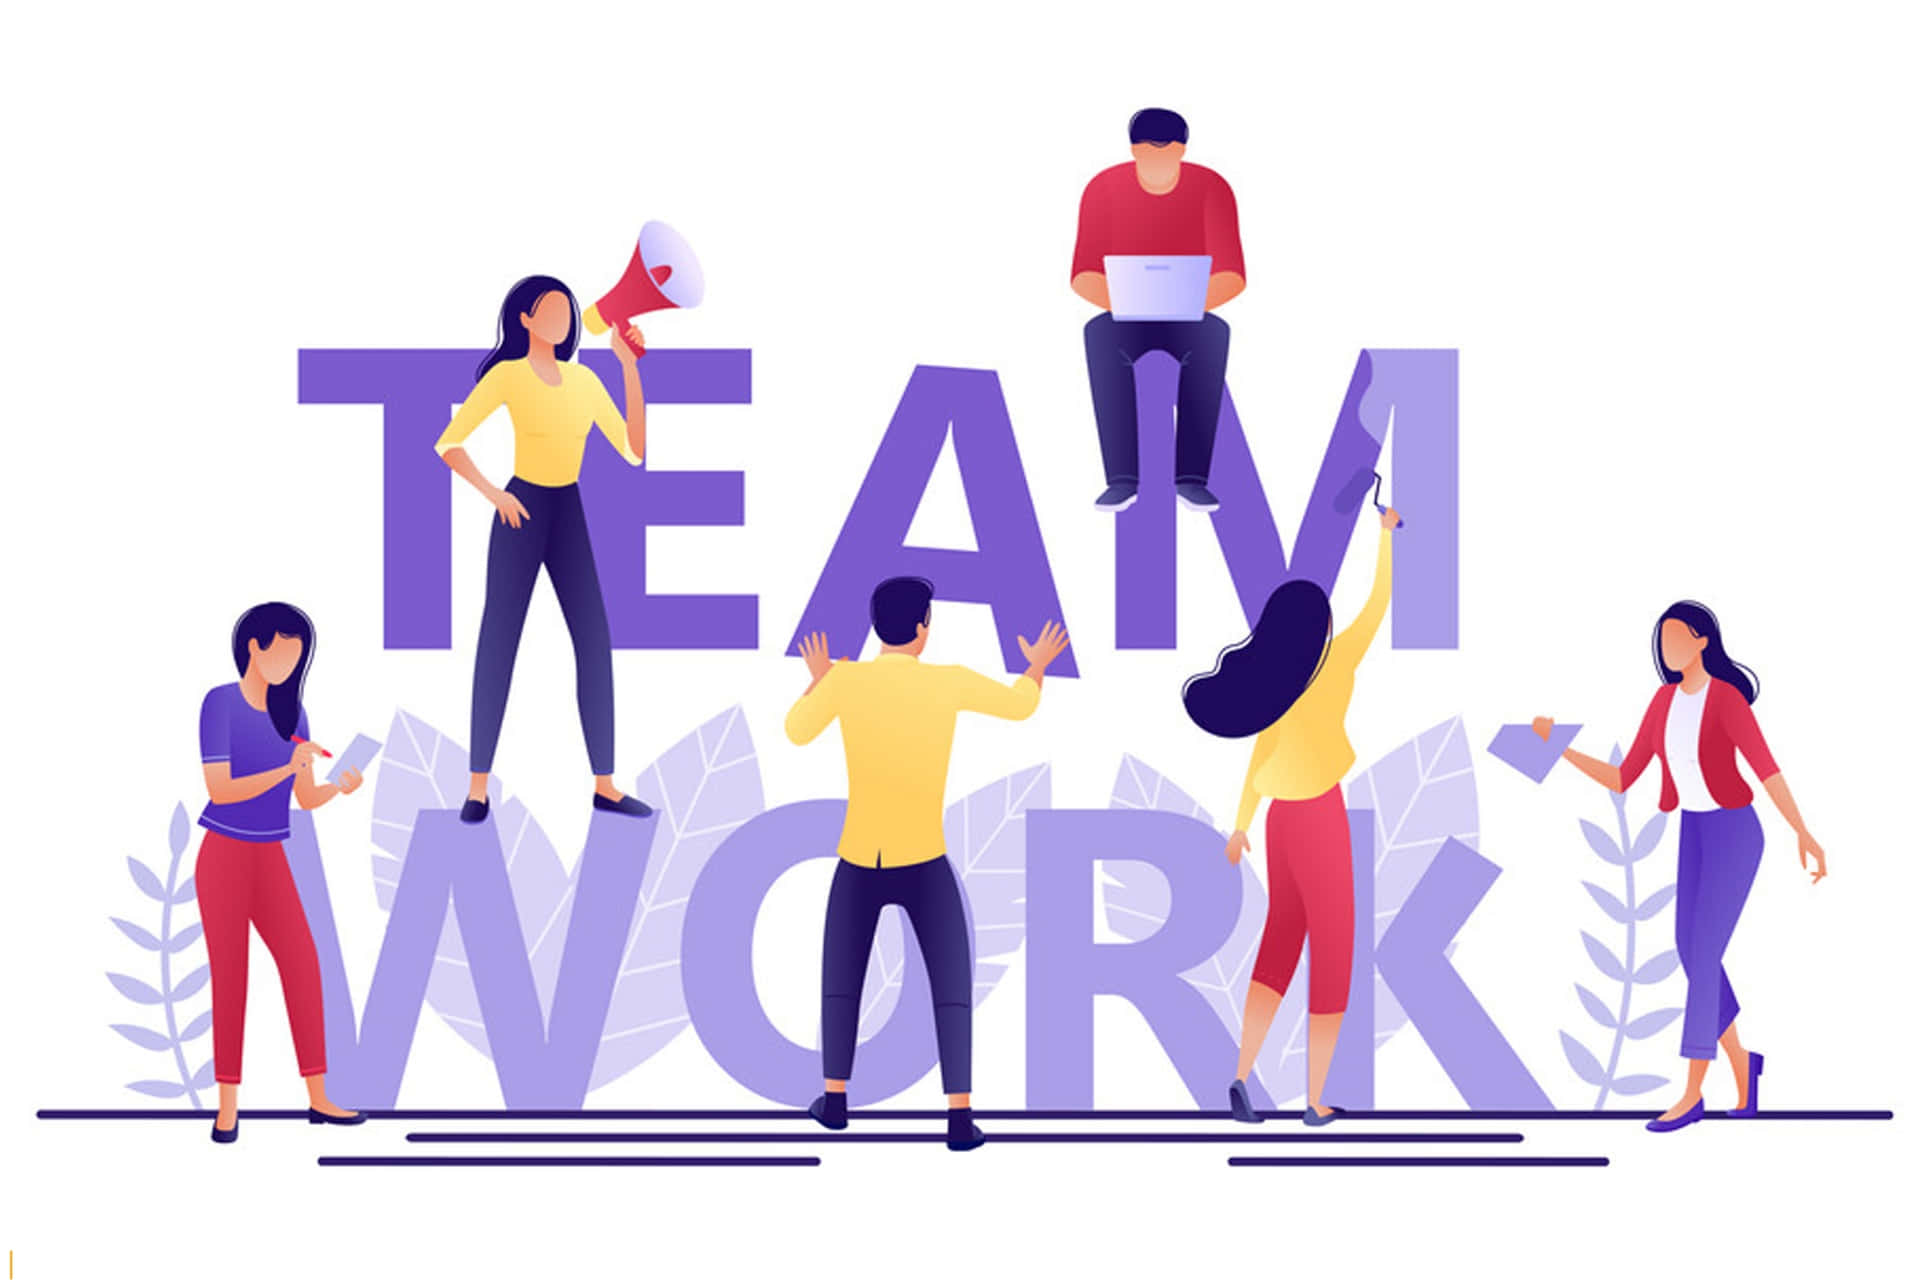 Teamwork Concept With People Holding Up The Word Wallpaper